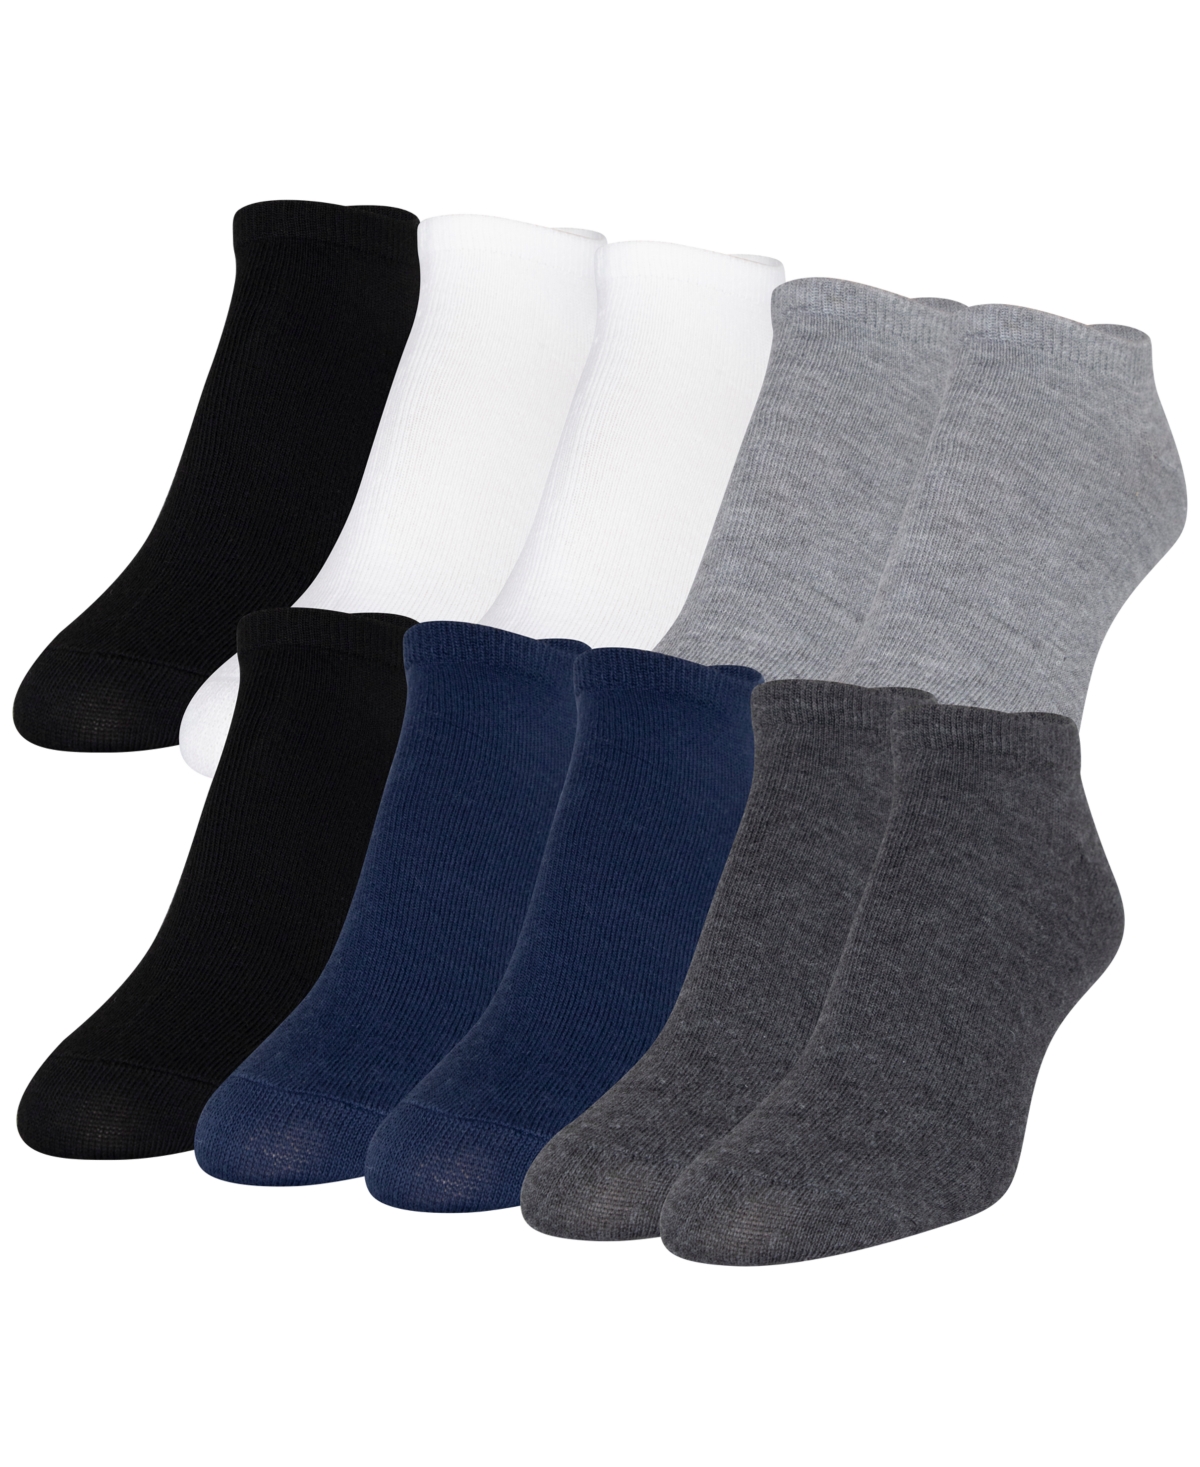 Women's 10-Pack Casual Lightweight No-Show Socks - Charcoal/Grey/Black/White/Blue